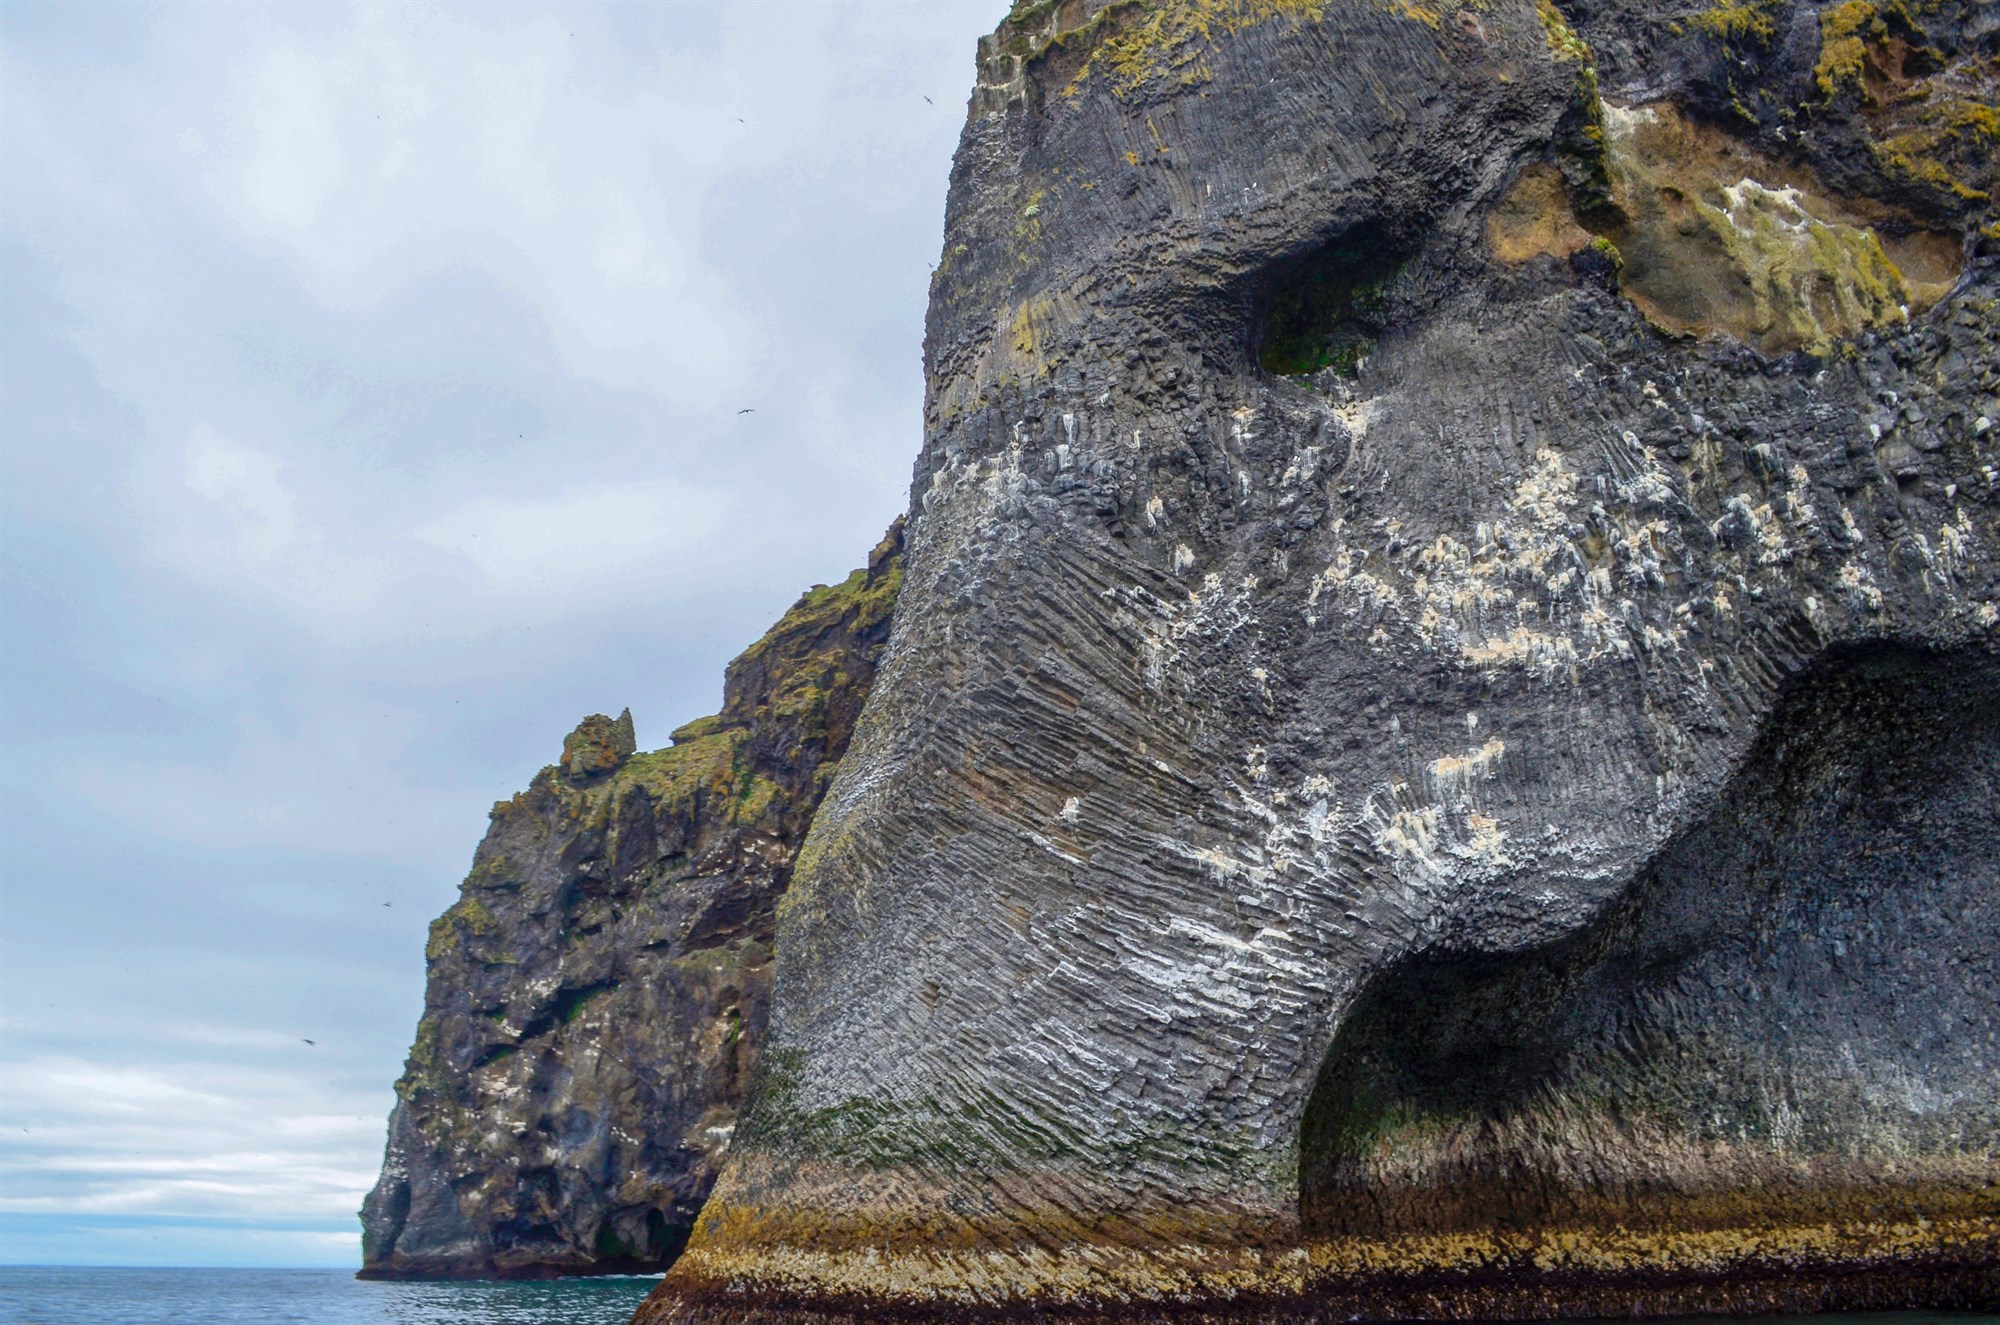 Elephant rock is in the Westman Islands of the south coast of Iceland.